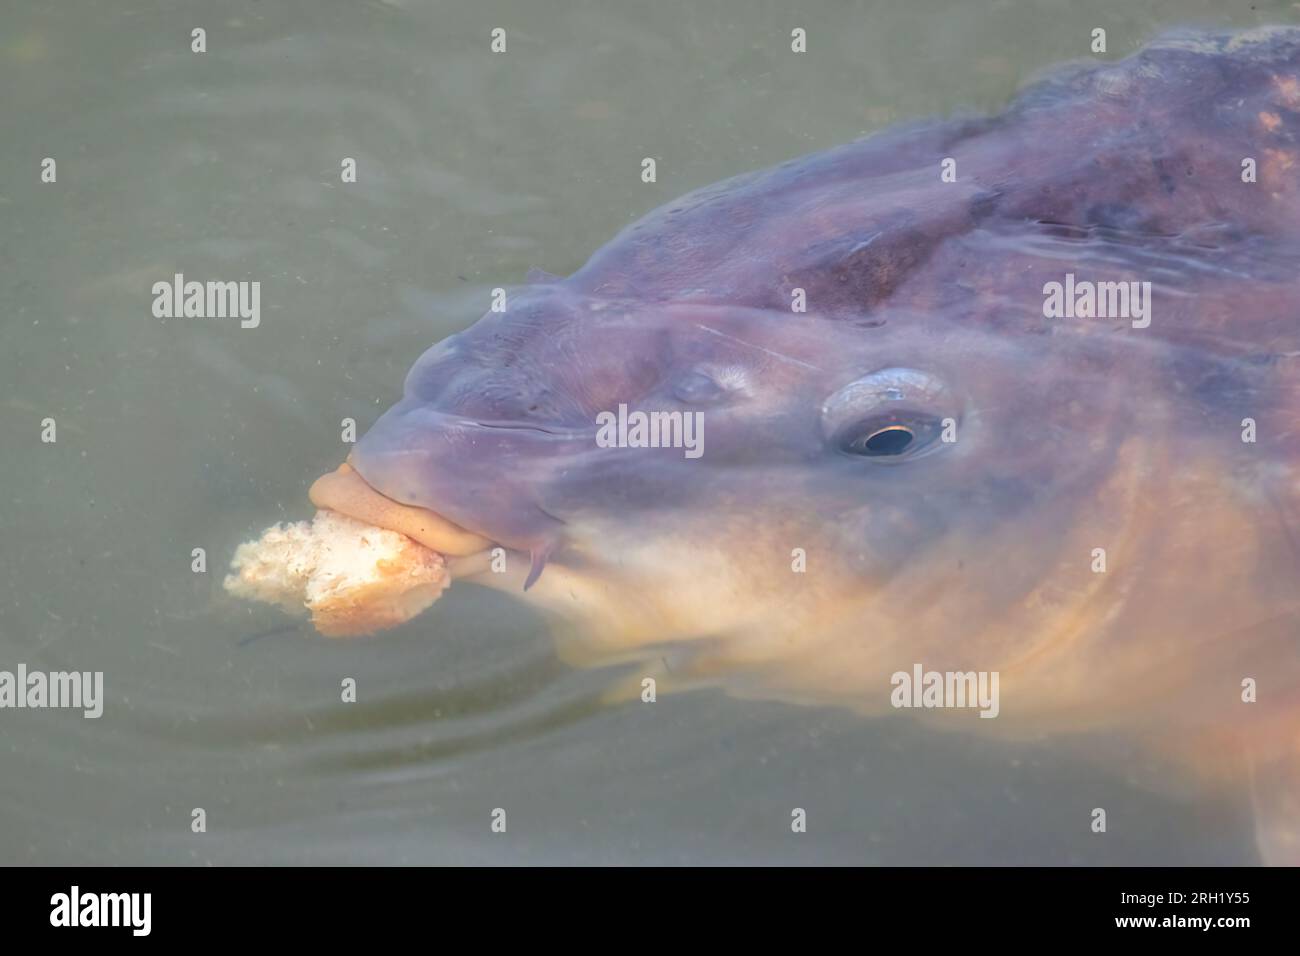 A very close photograph of a common carp, Cyprinus carpio, as it breaks the surface of the water to eat a piece of bread floating on the surface Stock Photo